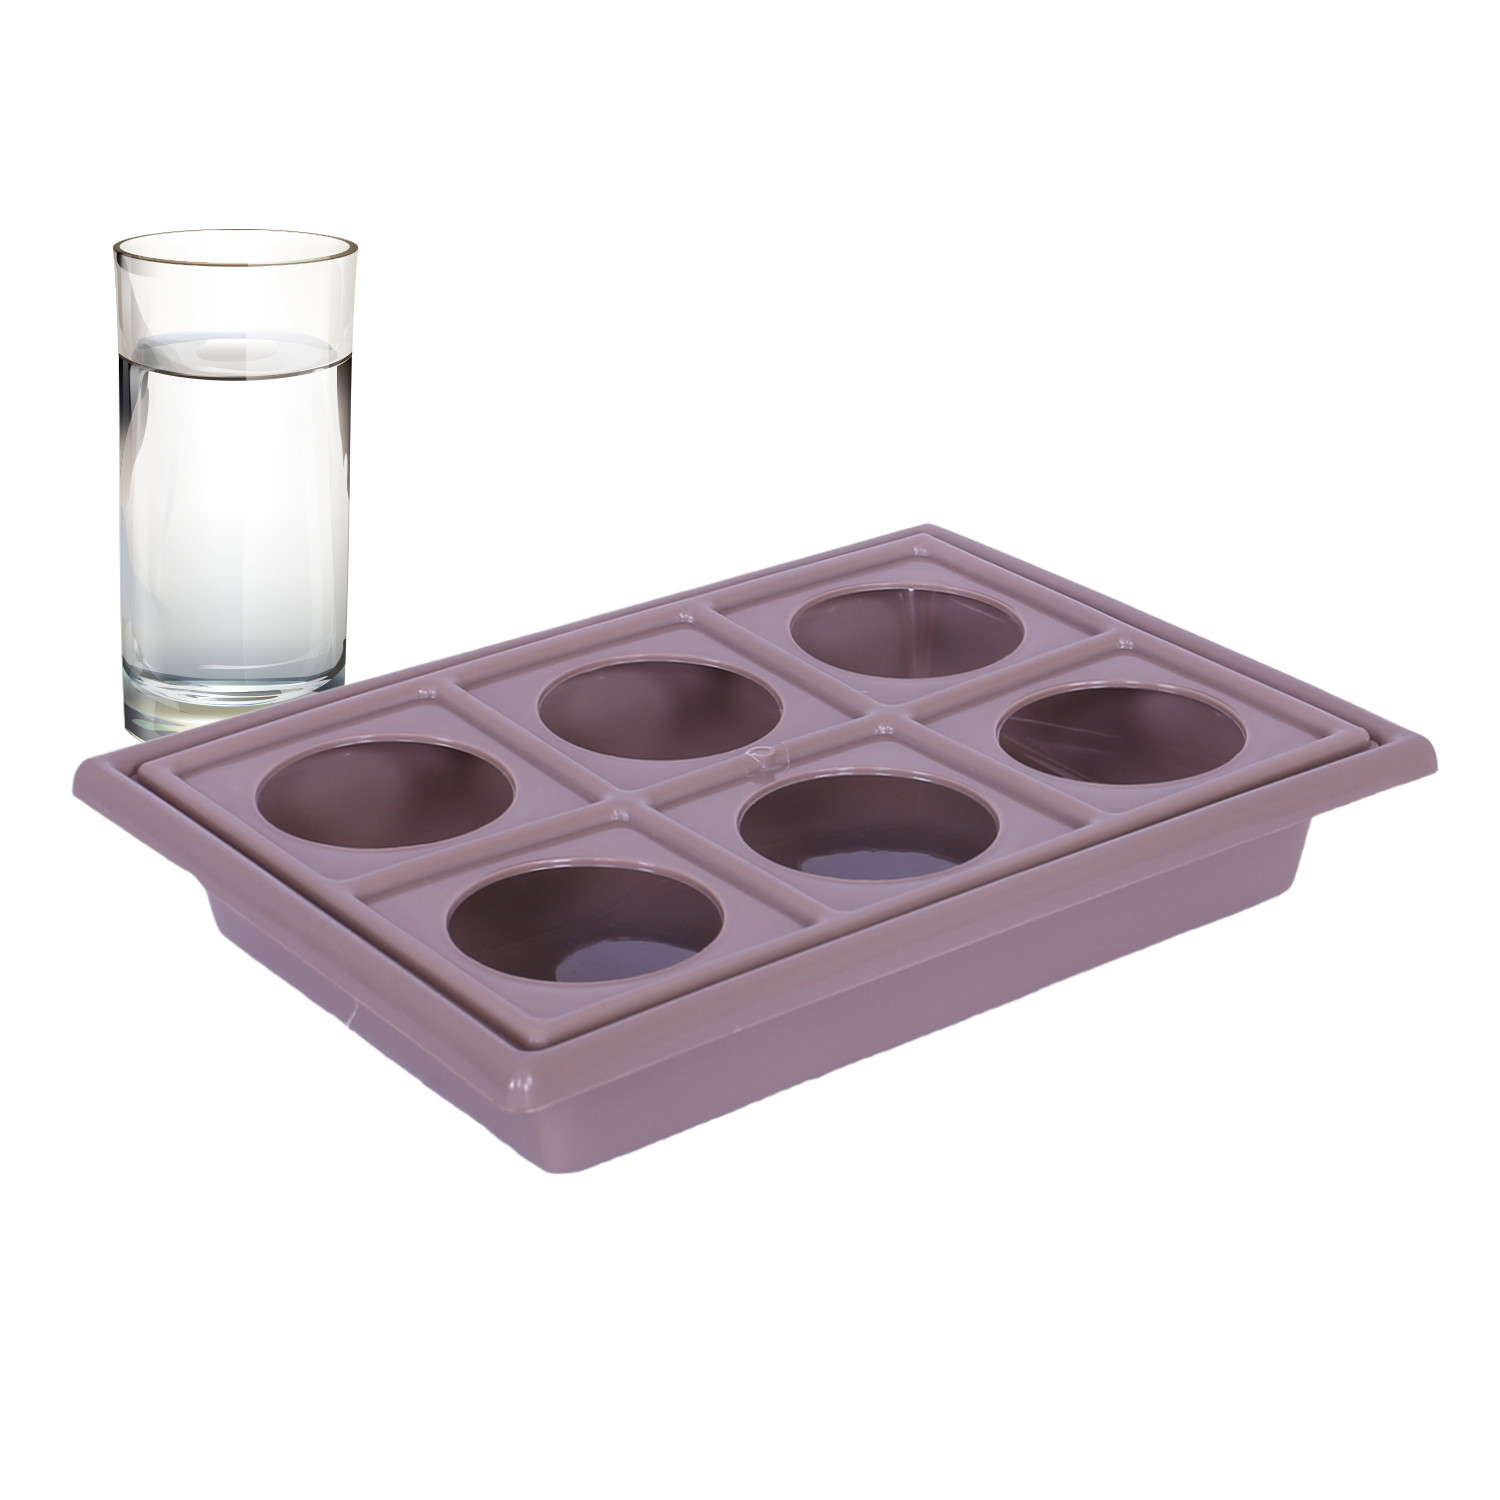 Kuber Industries Glass Tray | Plastic Glass Holder | Tray with Cutout Handles | Glass Serving Tray | Glass Holder Tray for Seving | Kitchen Serving Tray | Brown